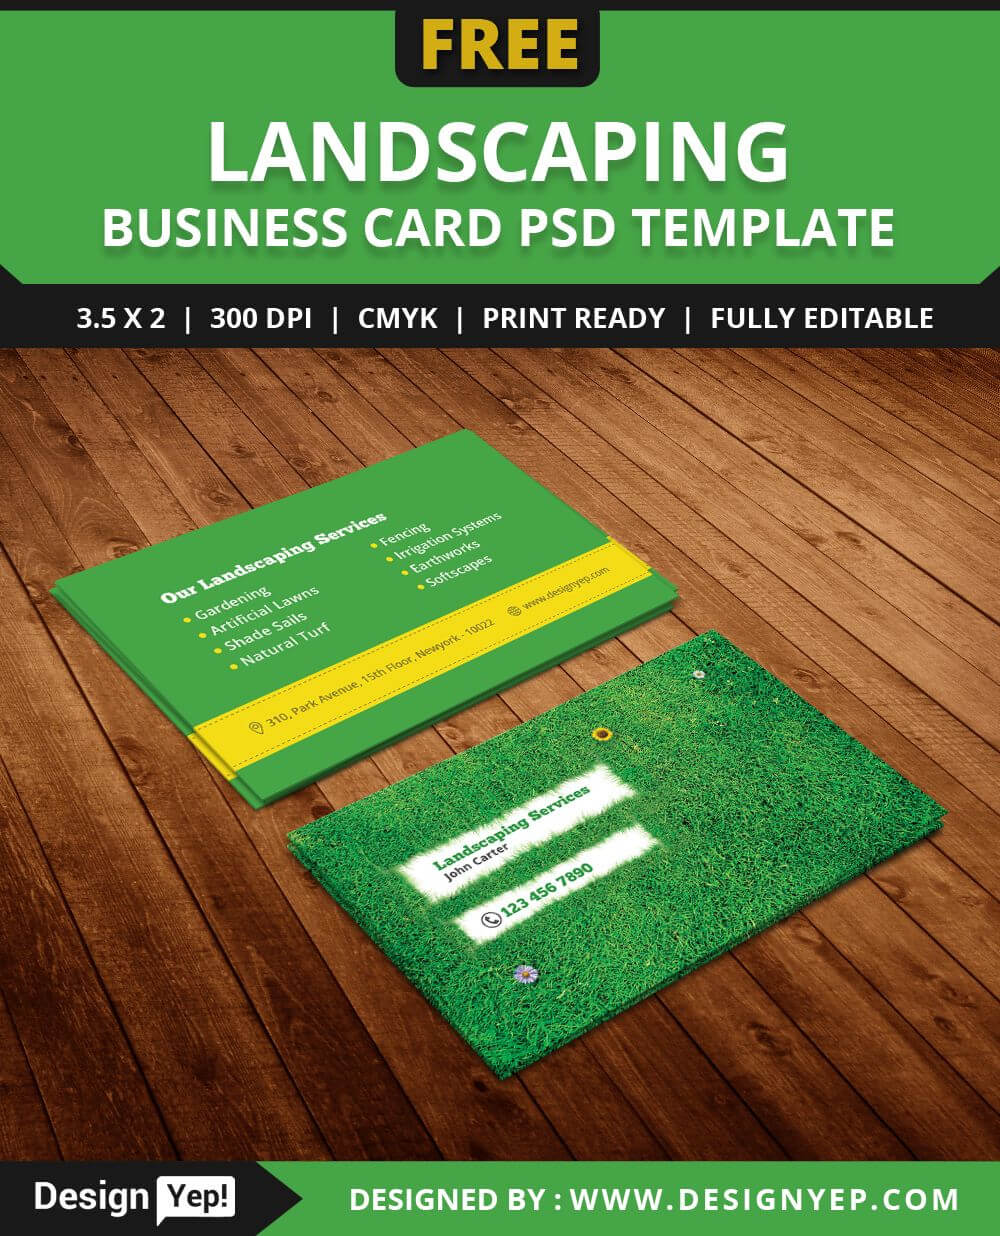 Free Landscaping Business Card Template Psd | Free Business Throughout Landscaping Business Card Template